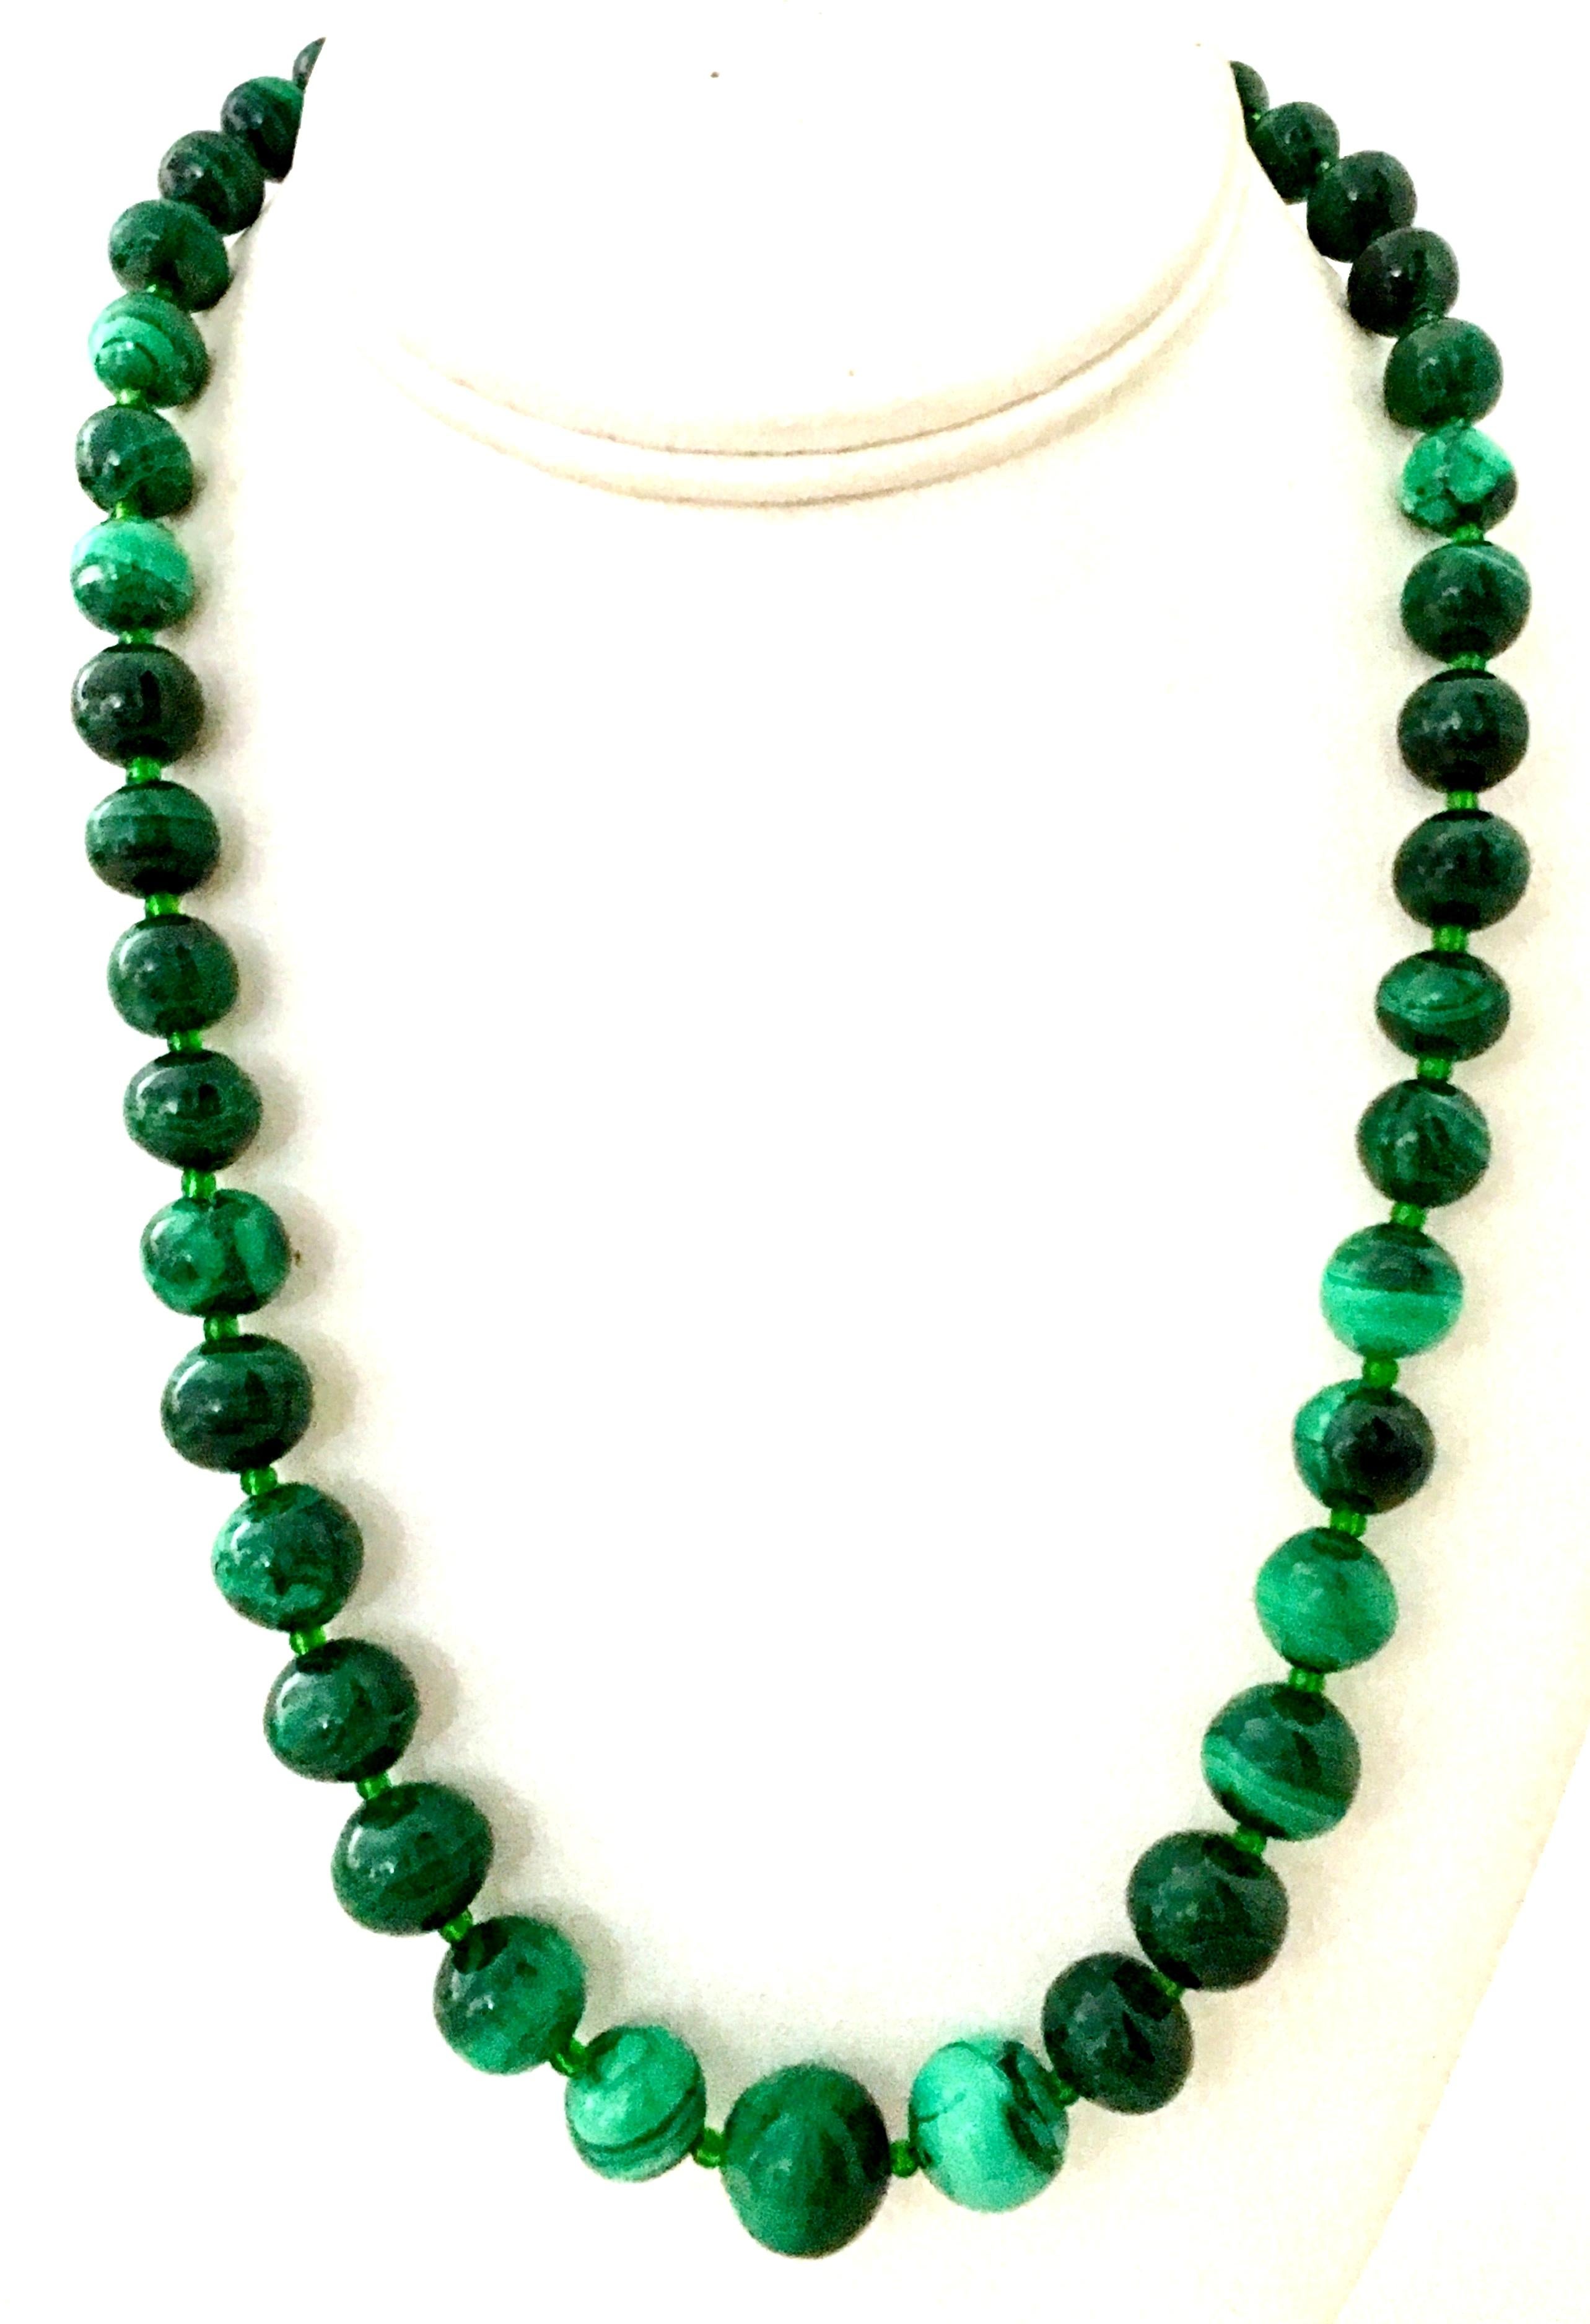 20th Century Polished Malachite Round Graduated Bead Necklace. This gorgeous piece features vibrant variegated authentic emerald green malachite graduated beads with emerald green glass rondelle/spacers. The clasp is chromium plated silver screw